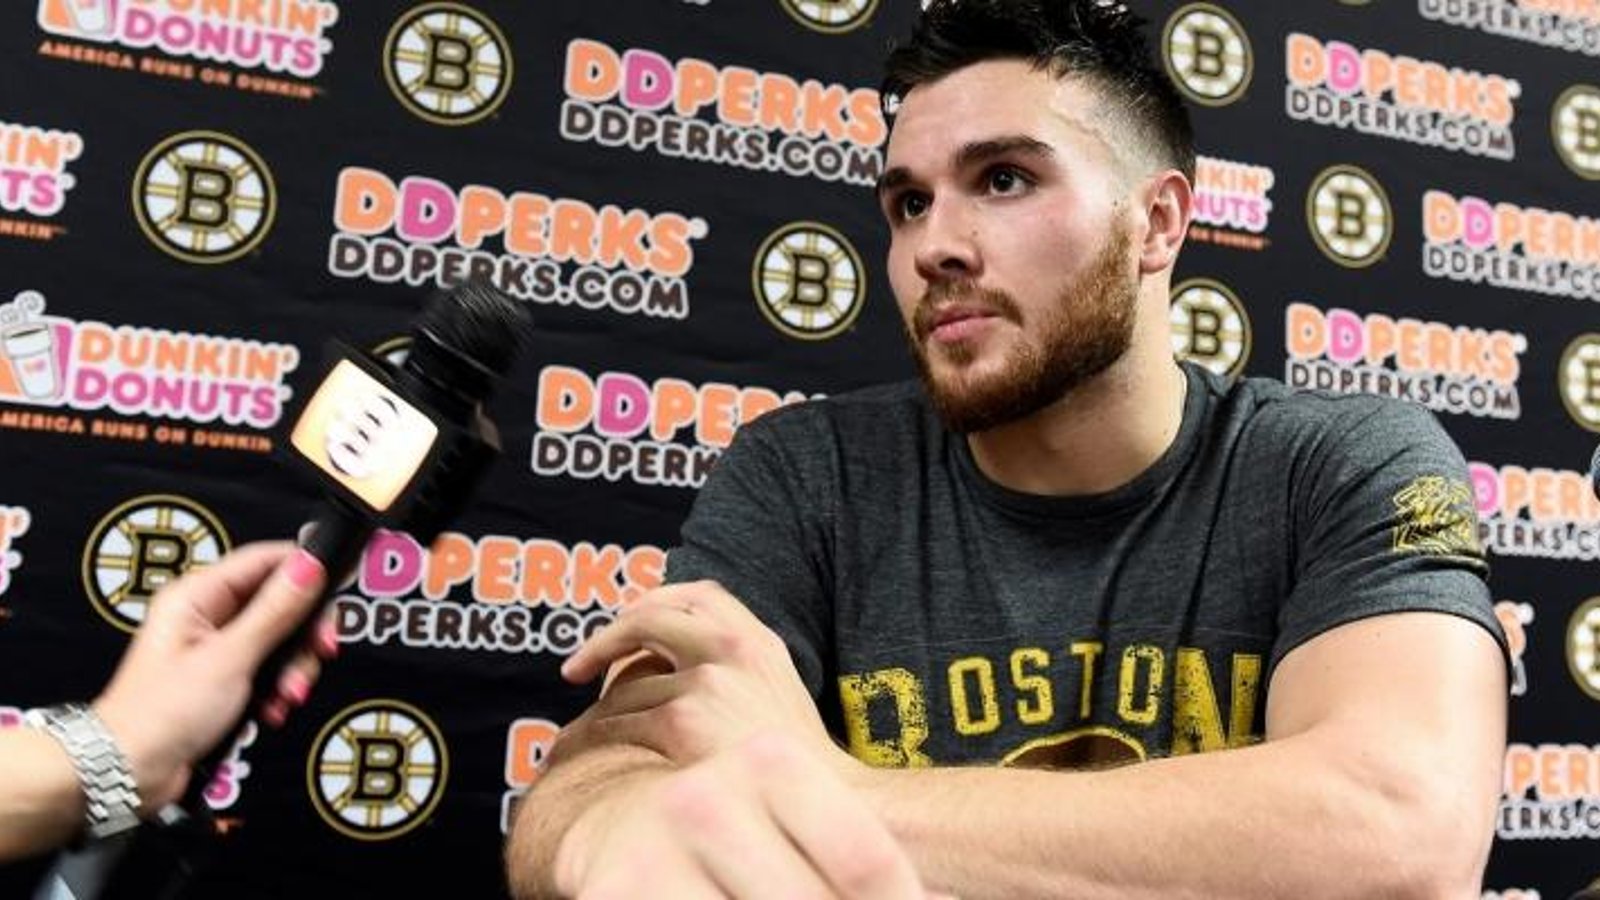 The Bruins have placed their infamous tough guy on waivers.